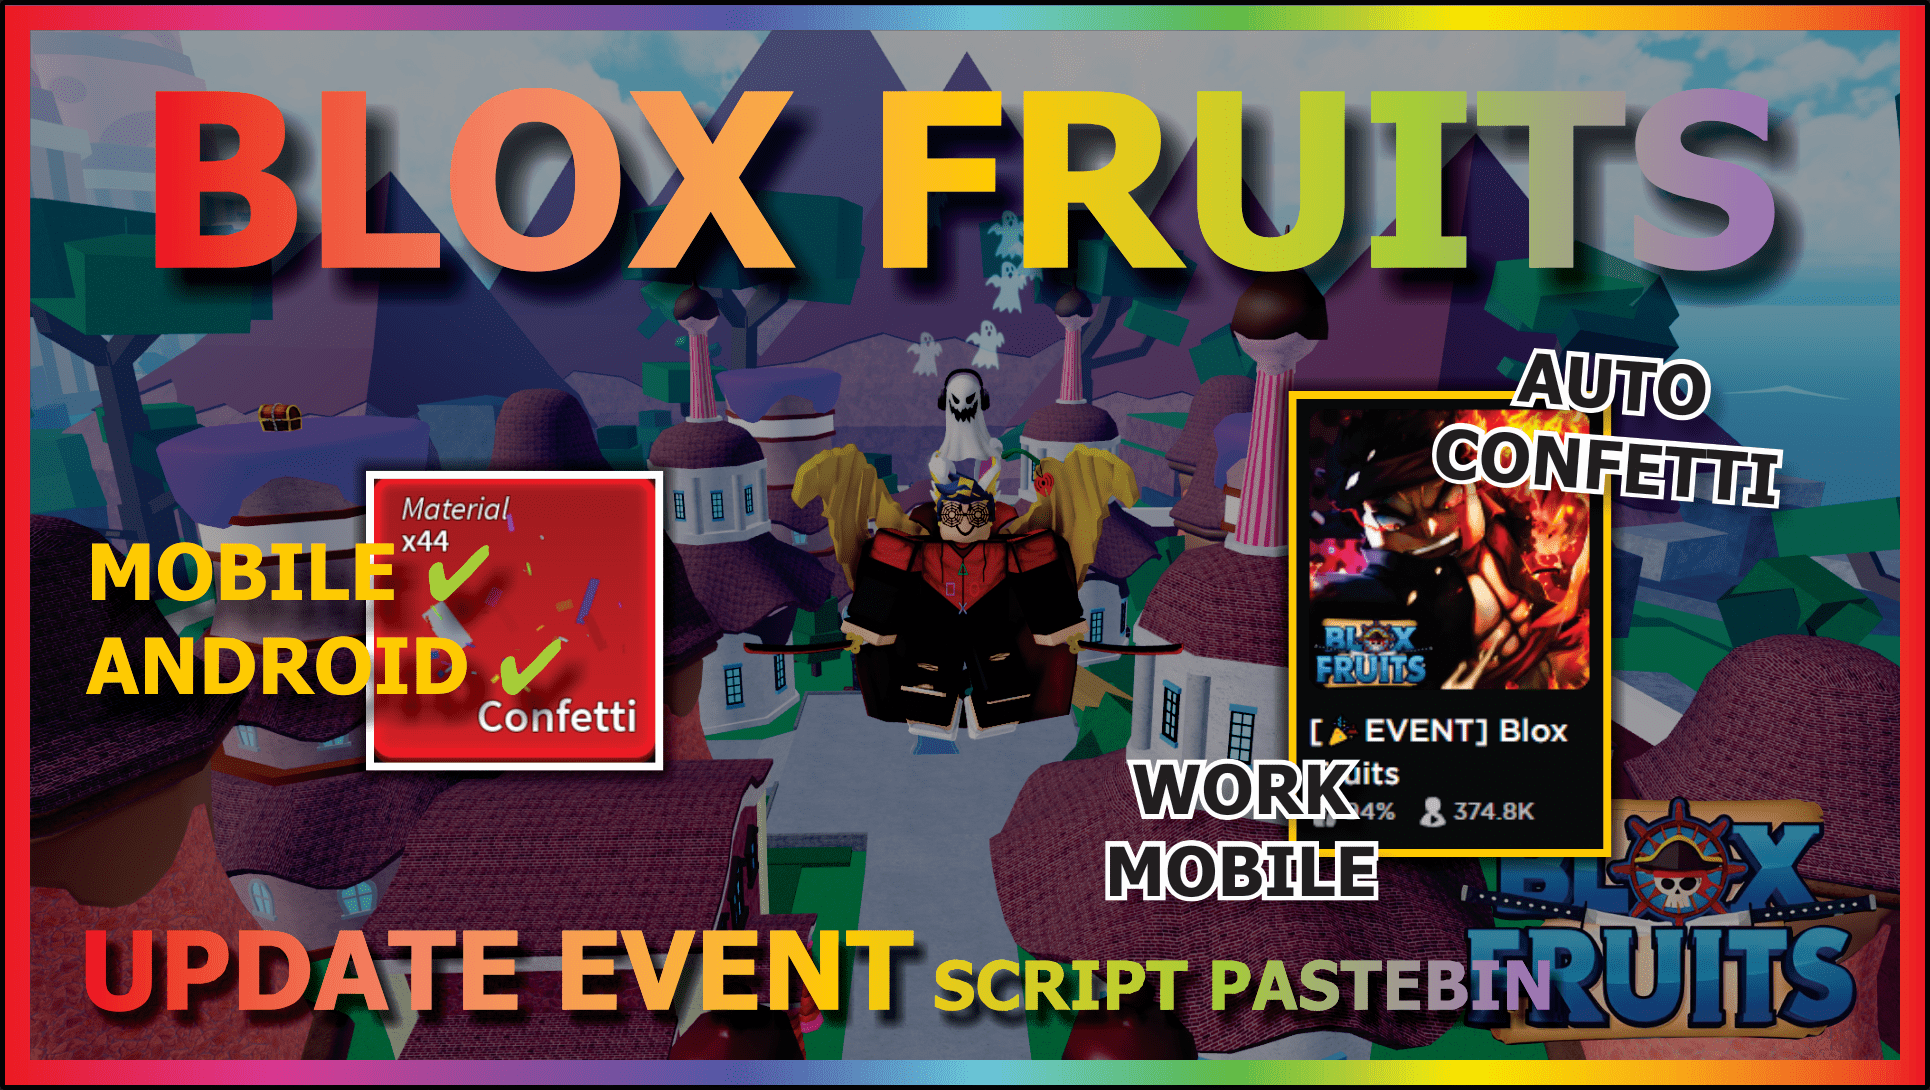 How to get confetti in Blox Fruits